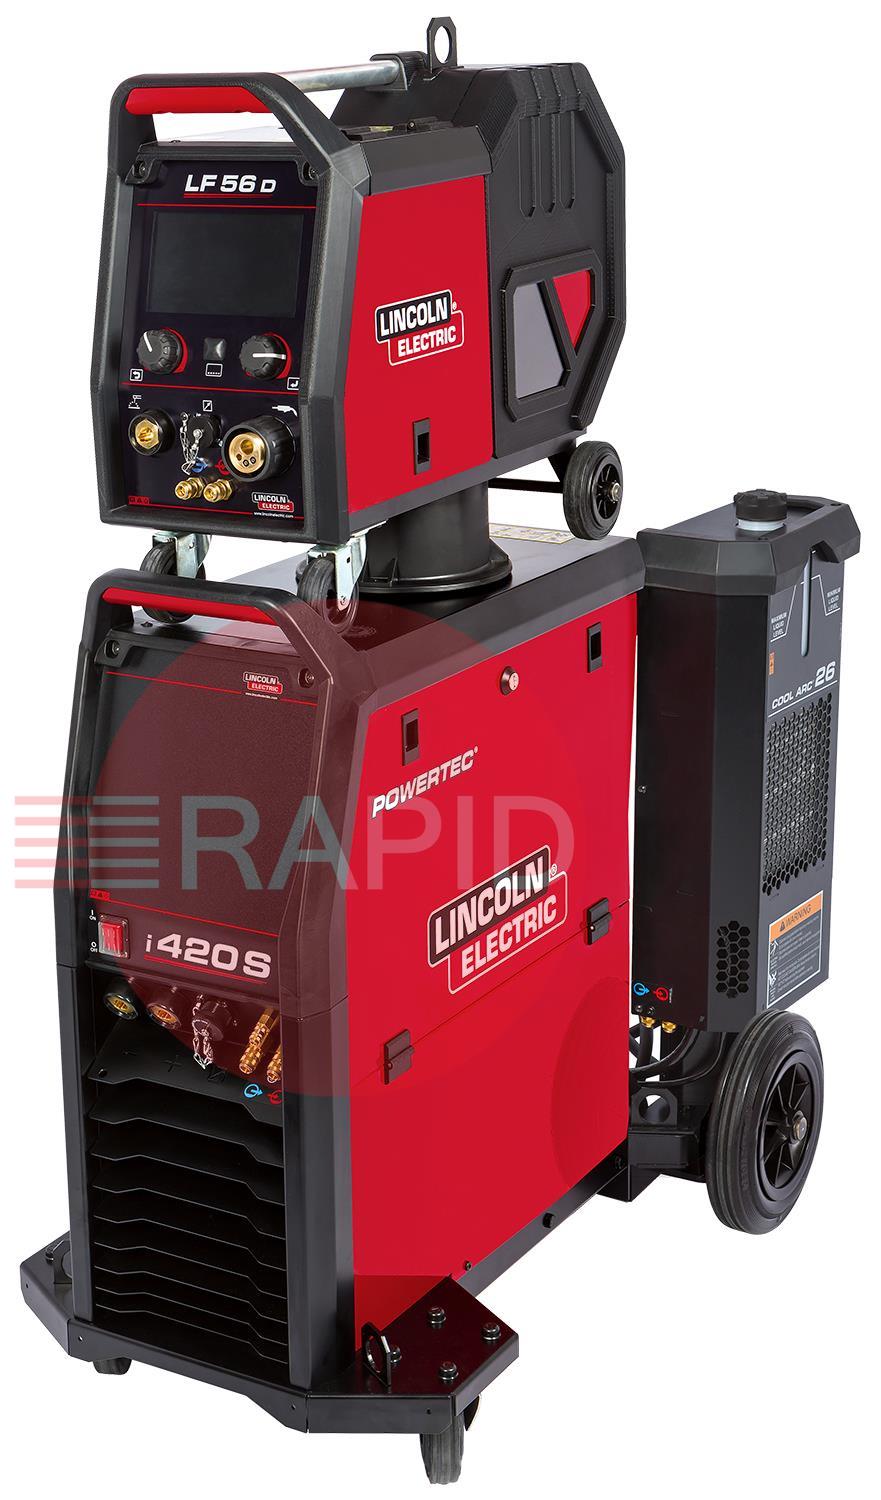 K14184-56-1WP  Lincoln Powertec i420S MIG Welder & LF-56D Wire Feeder Water Cooled Ready To Weld Package - 400v, 3ph